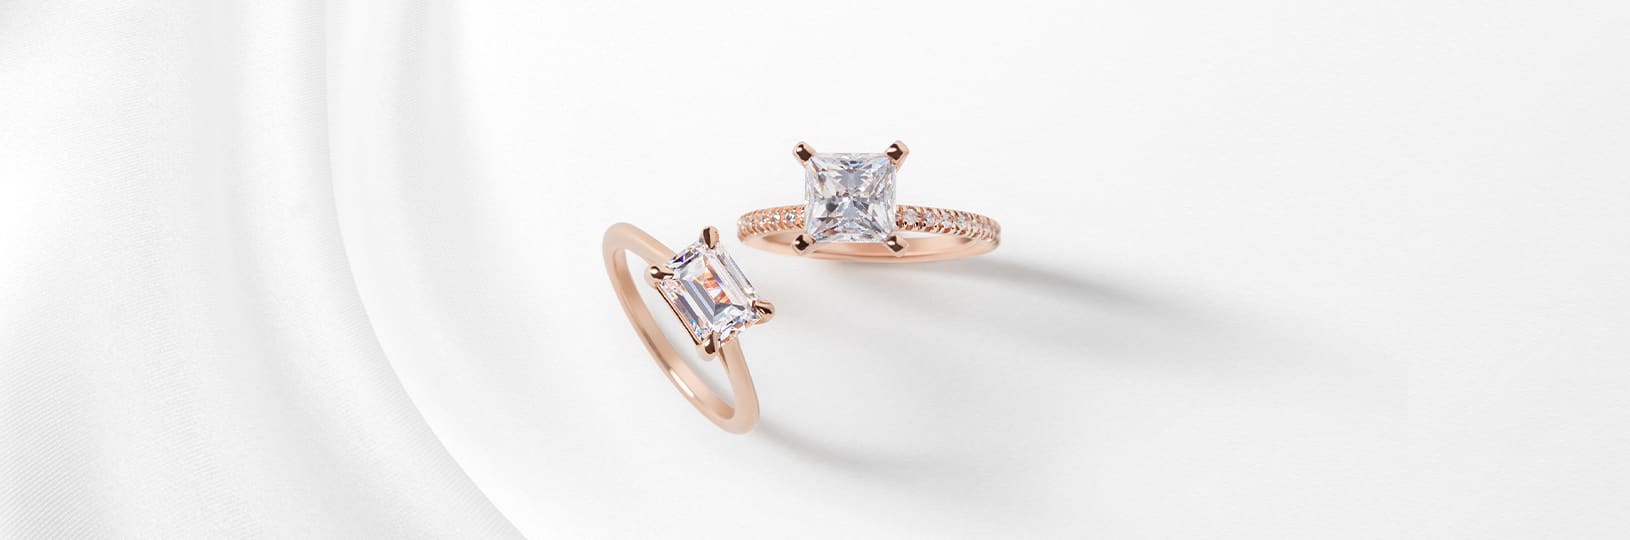 Two rose gold engagement rings